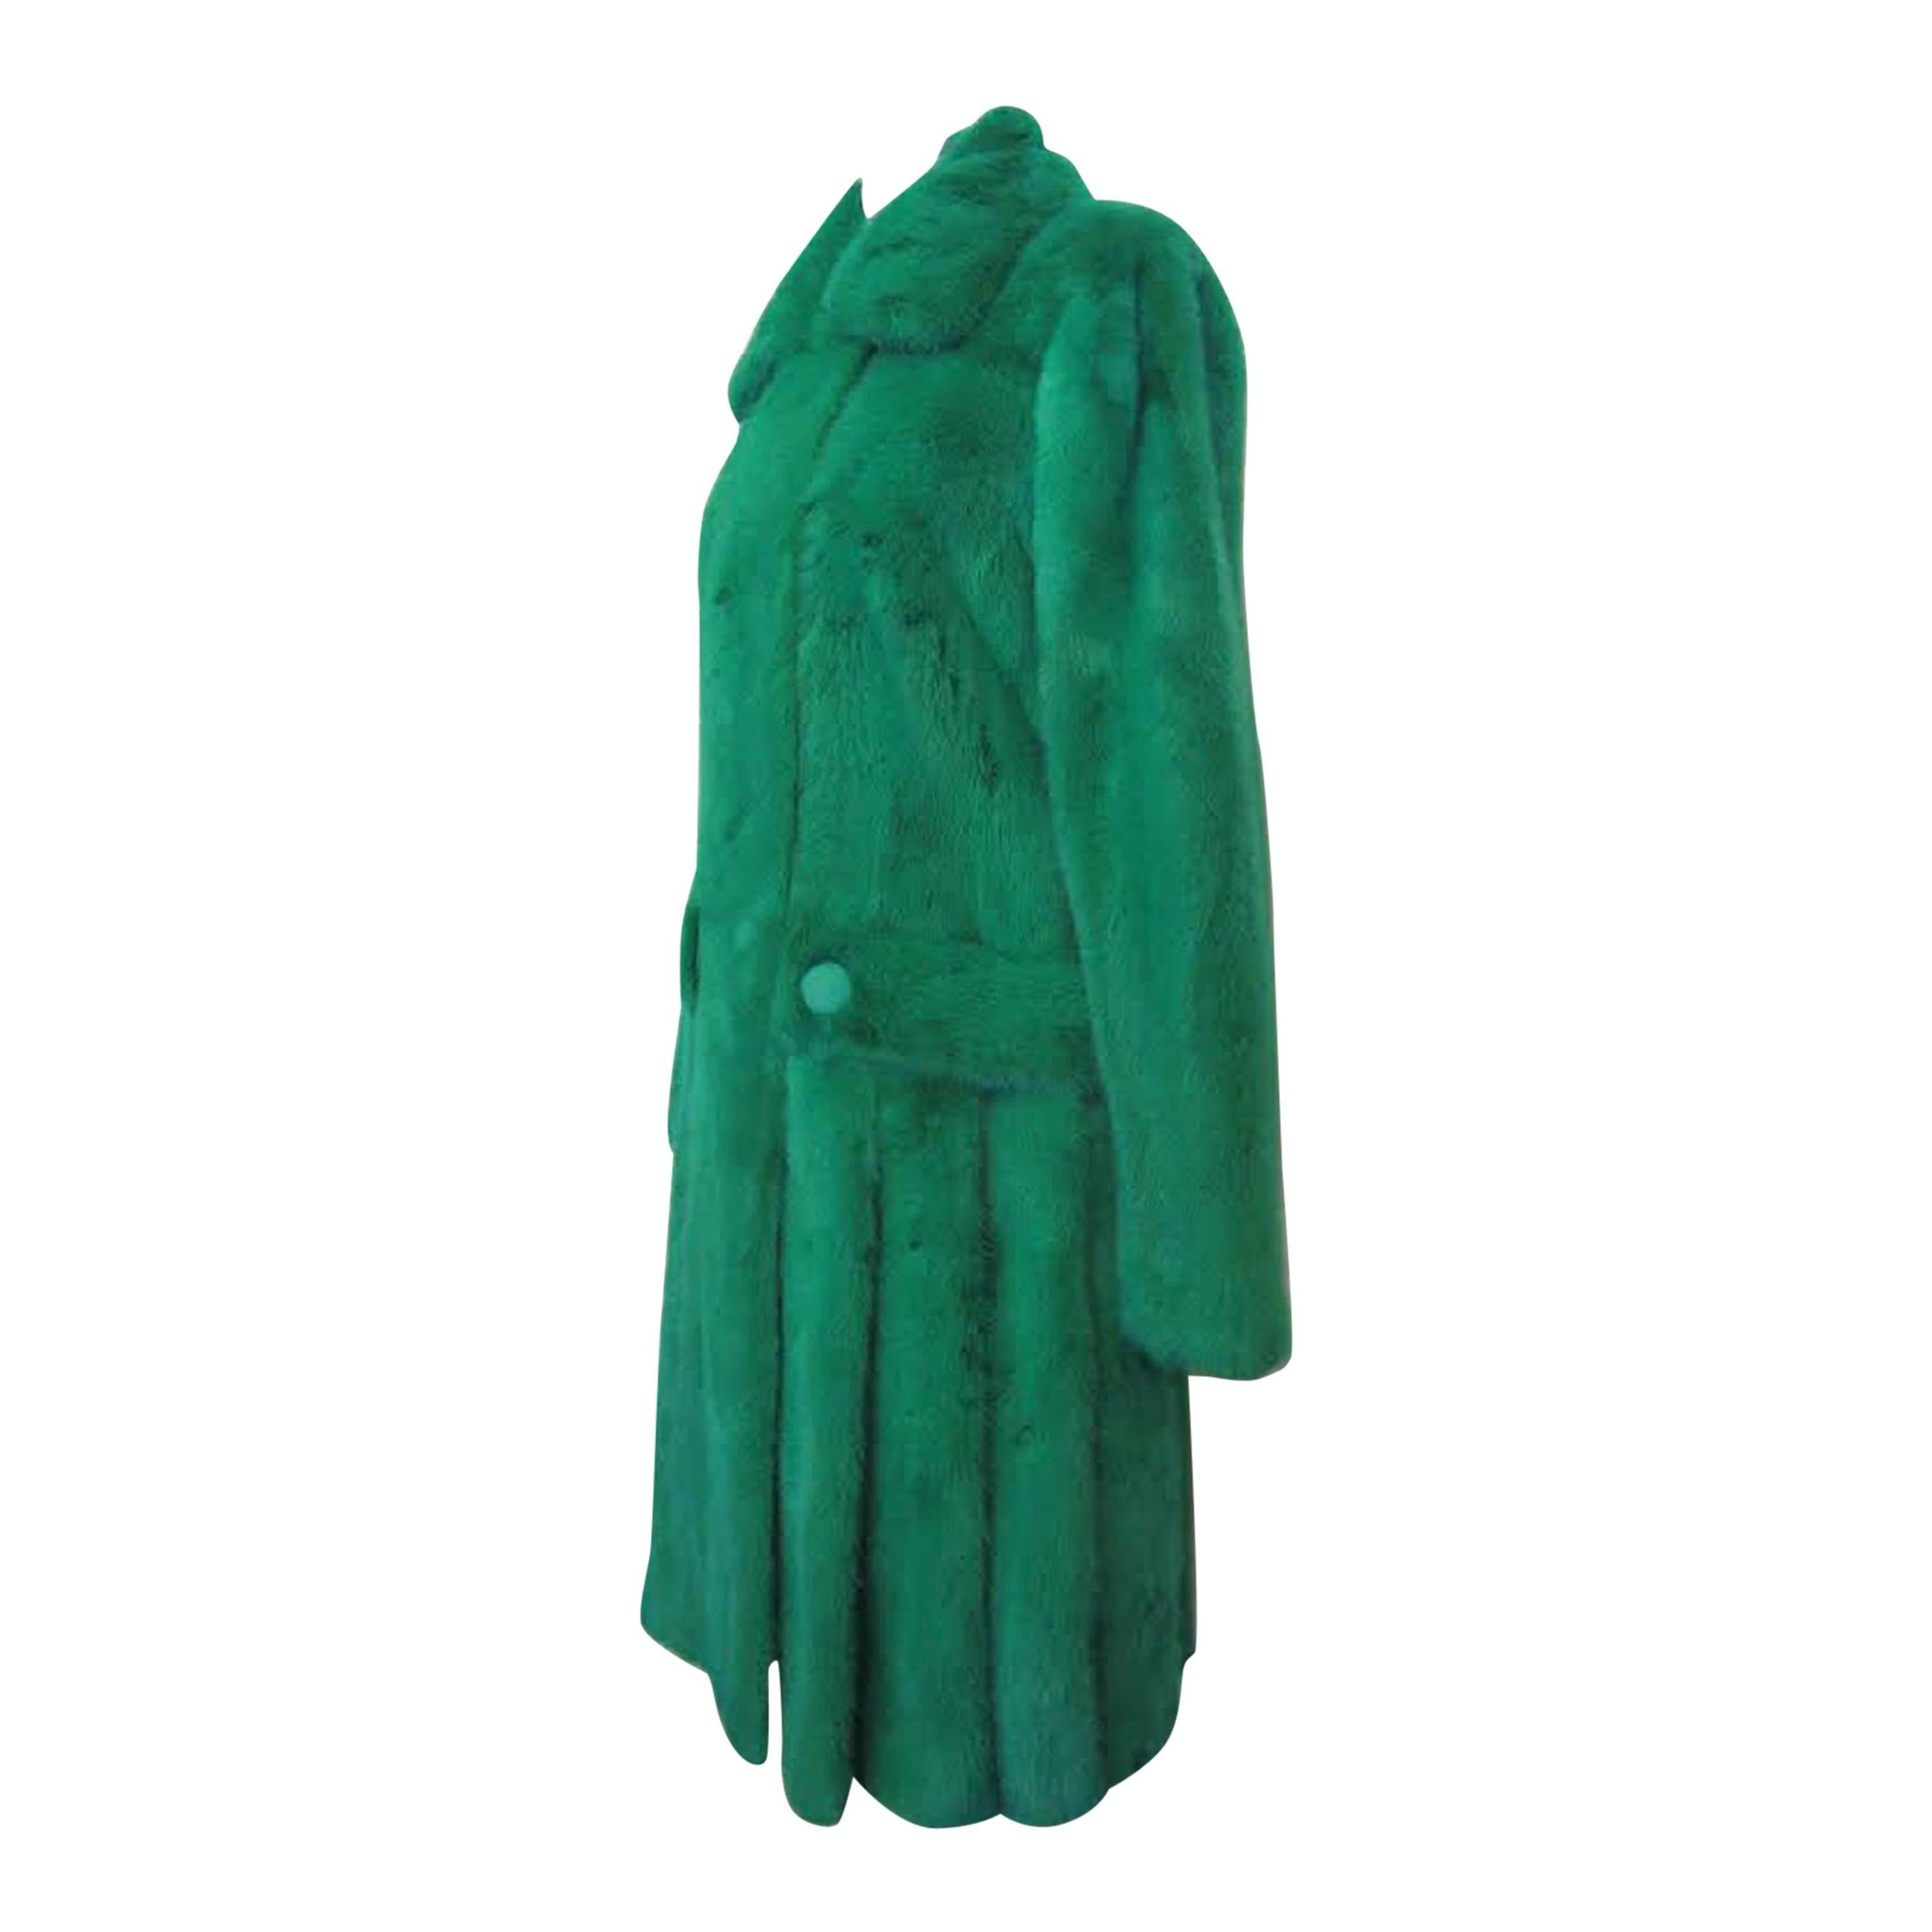 Gianni Versace Fall/Winter Runway 2012 Electric Green Mink Coat For Sale